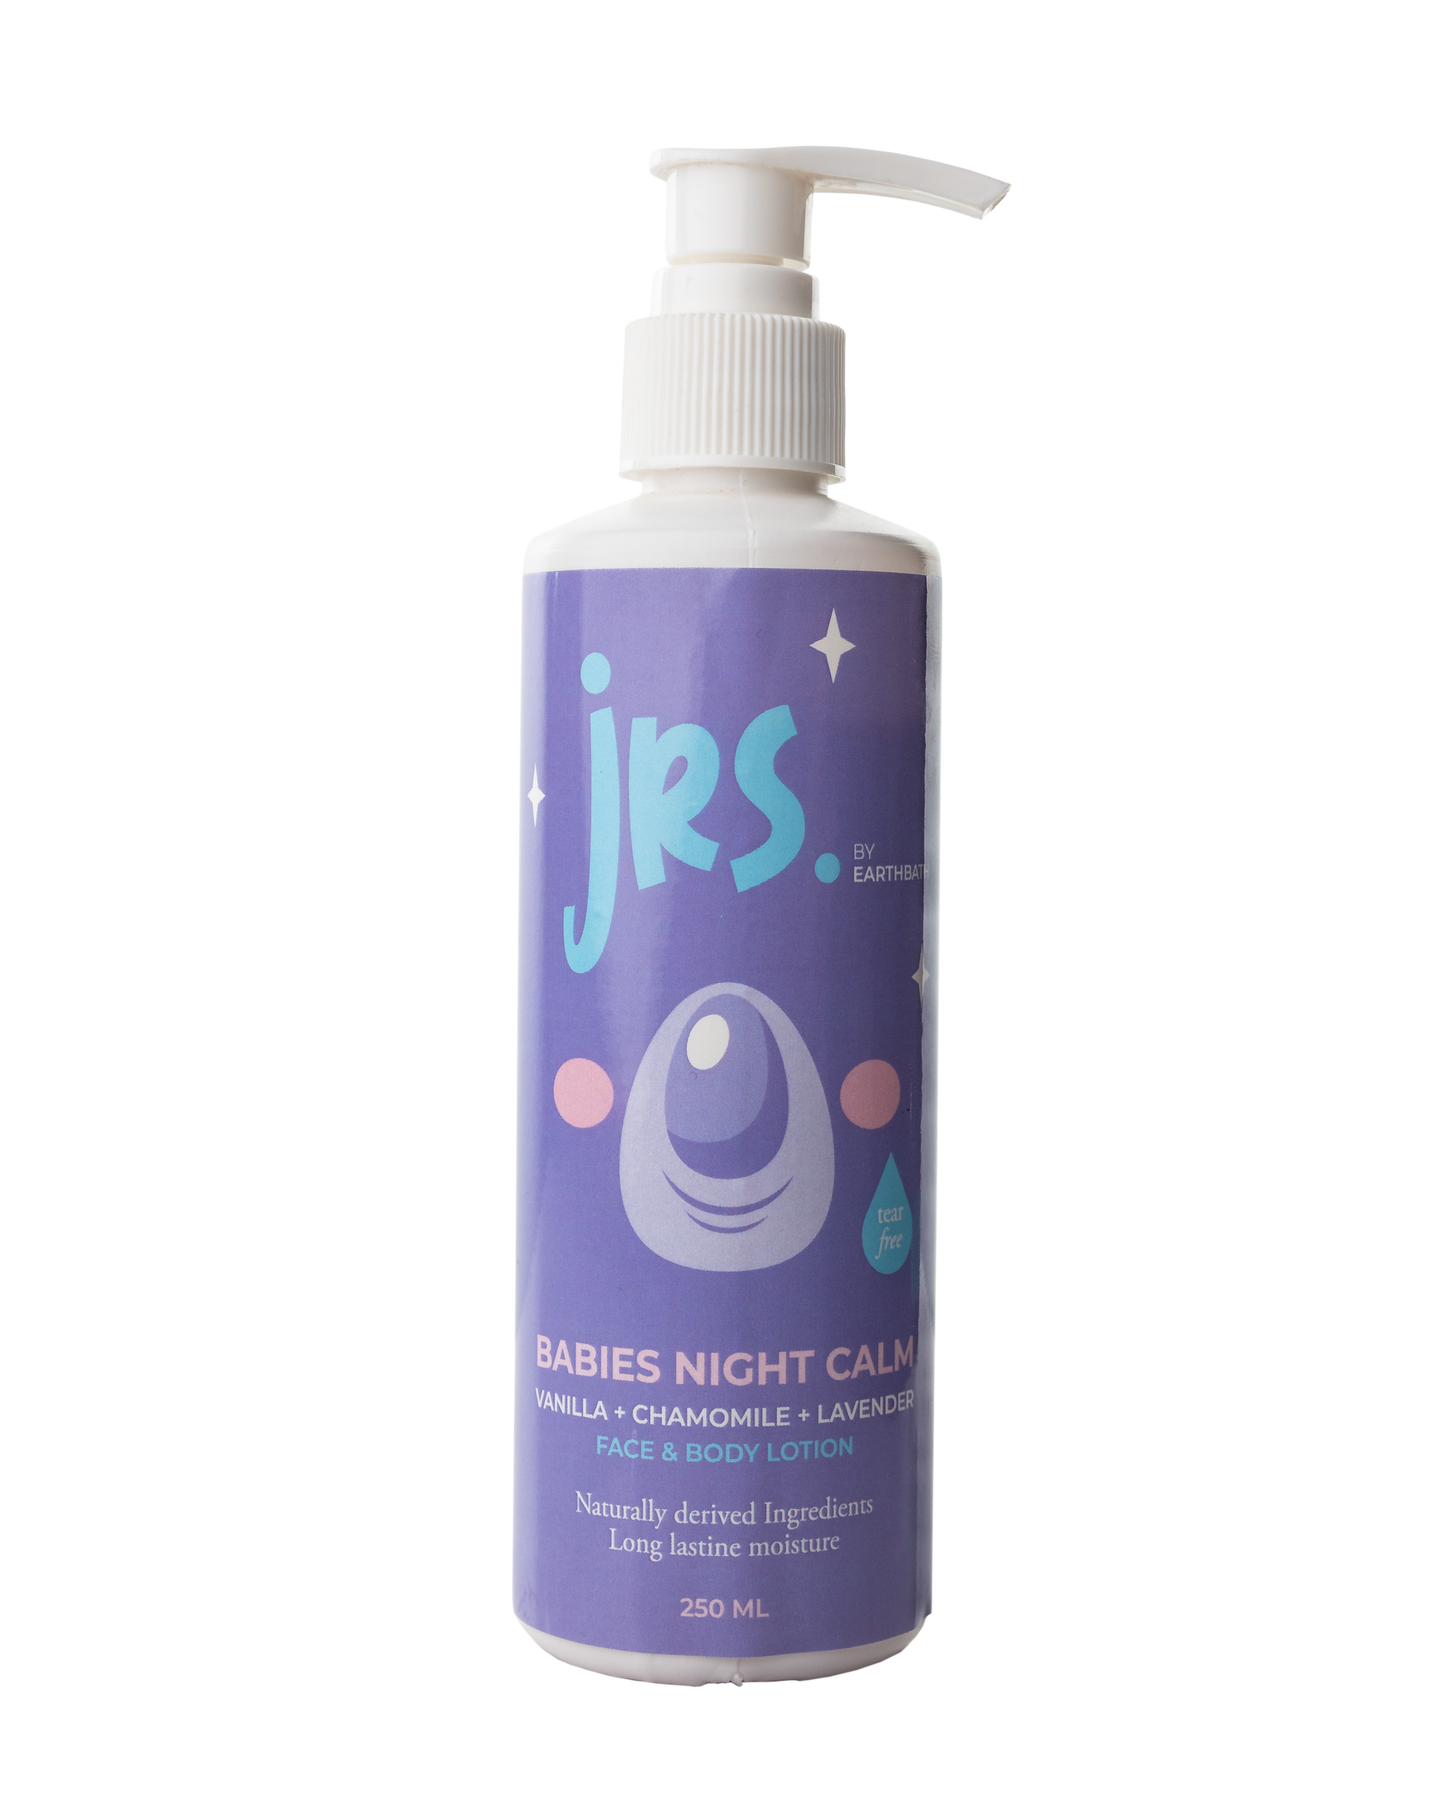 Babies Night Calm - Body & Face Lotion